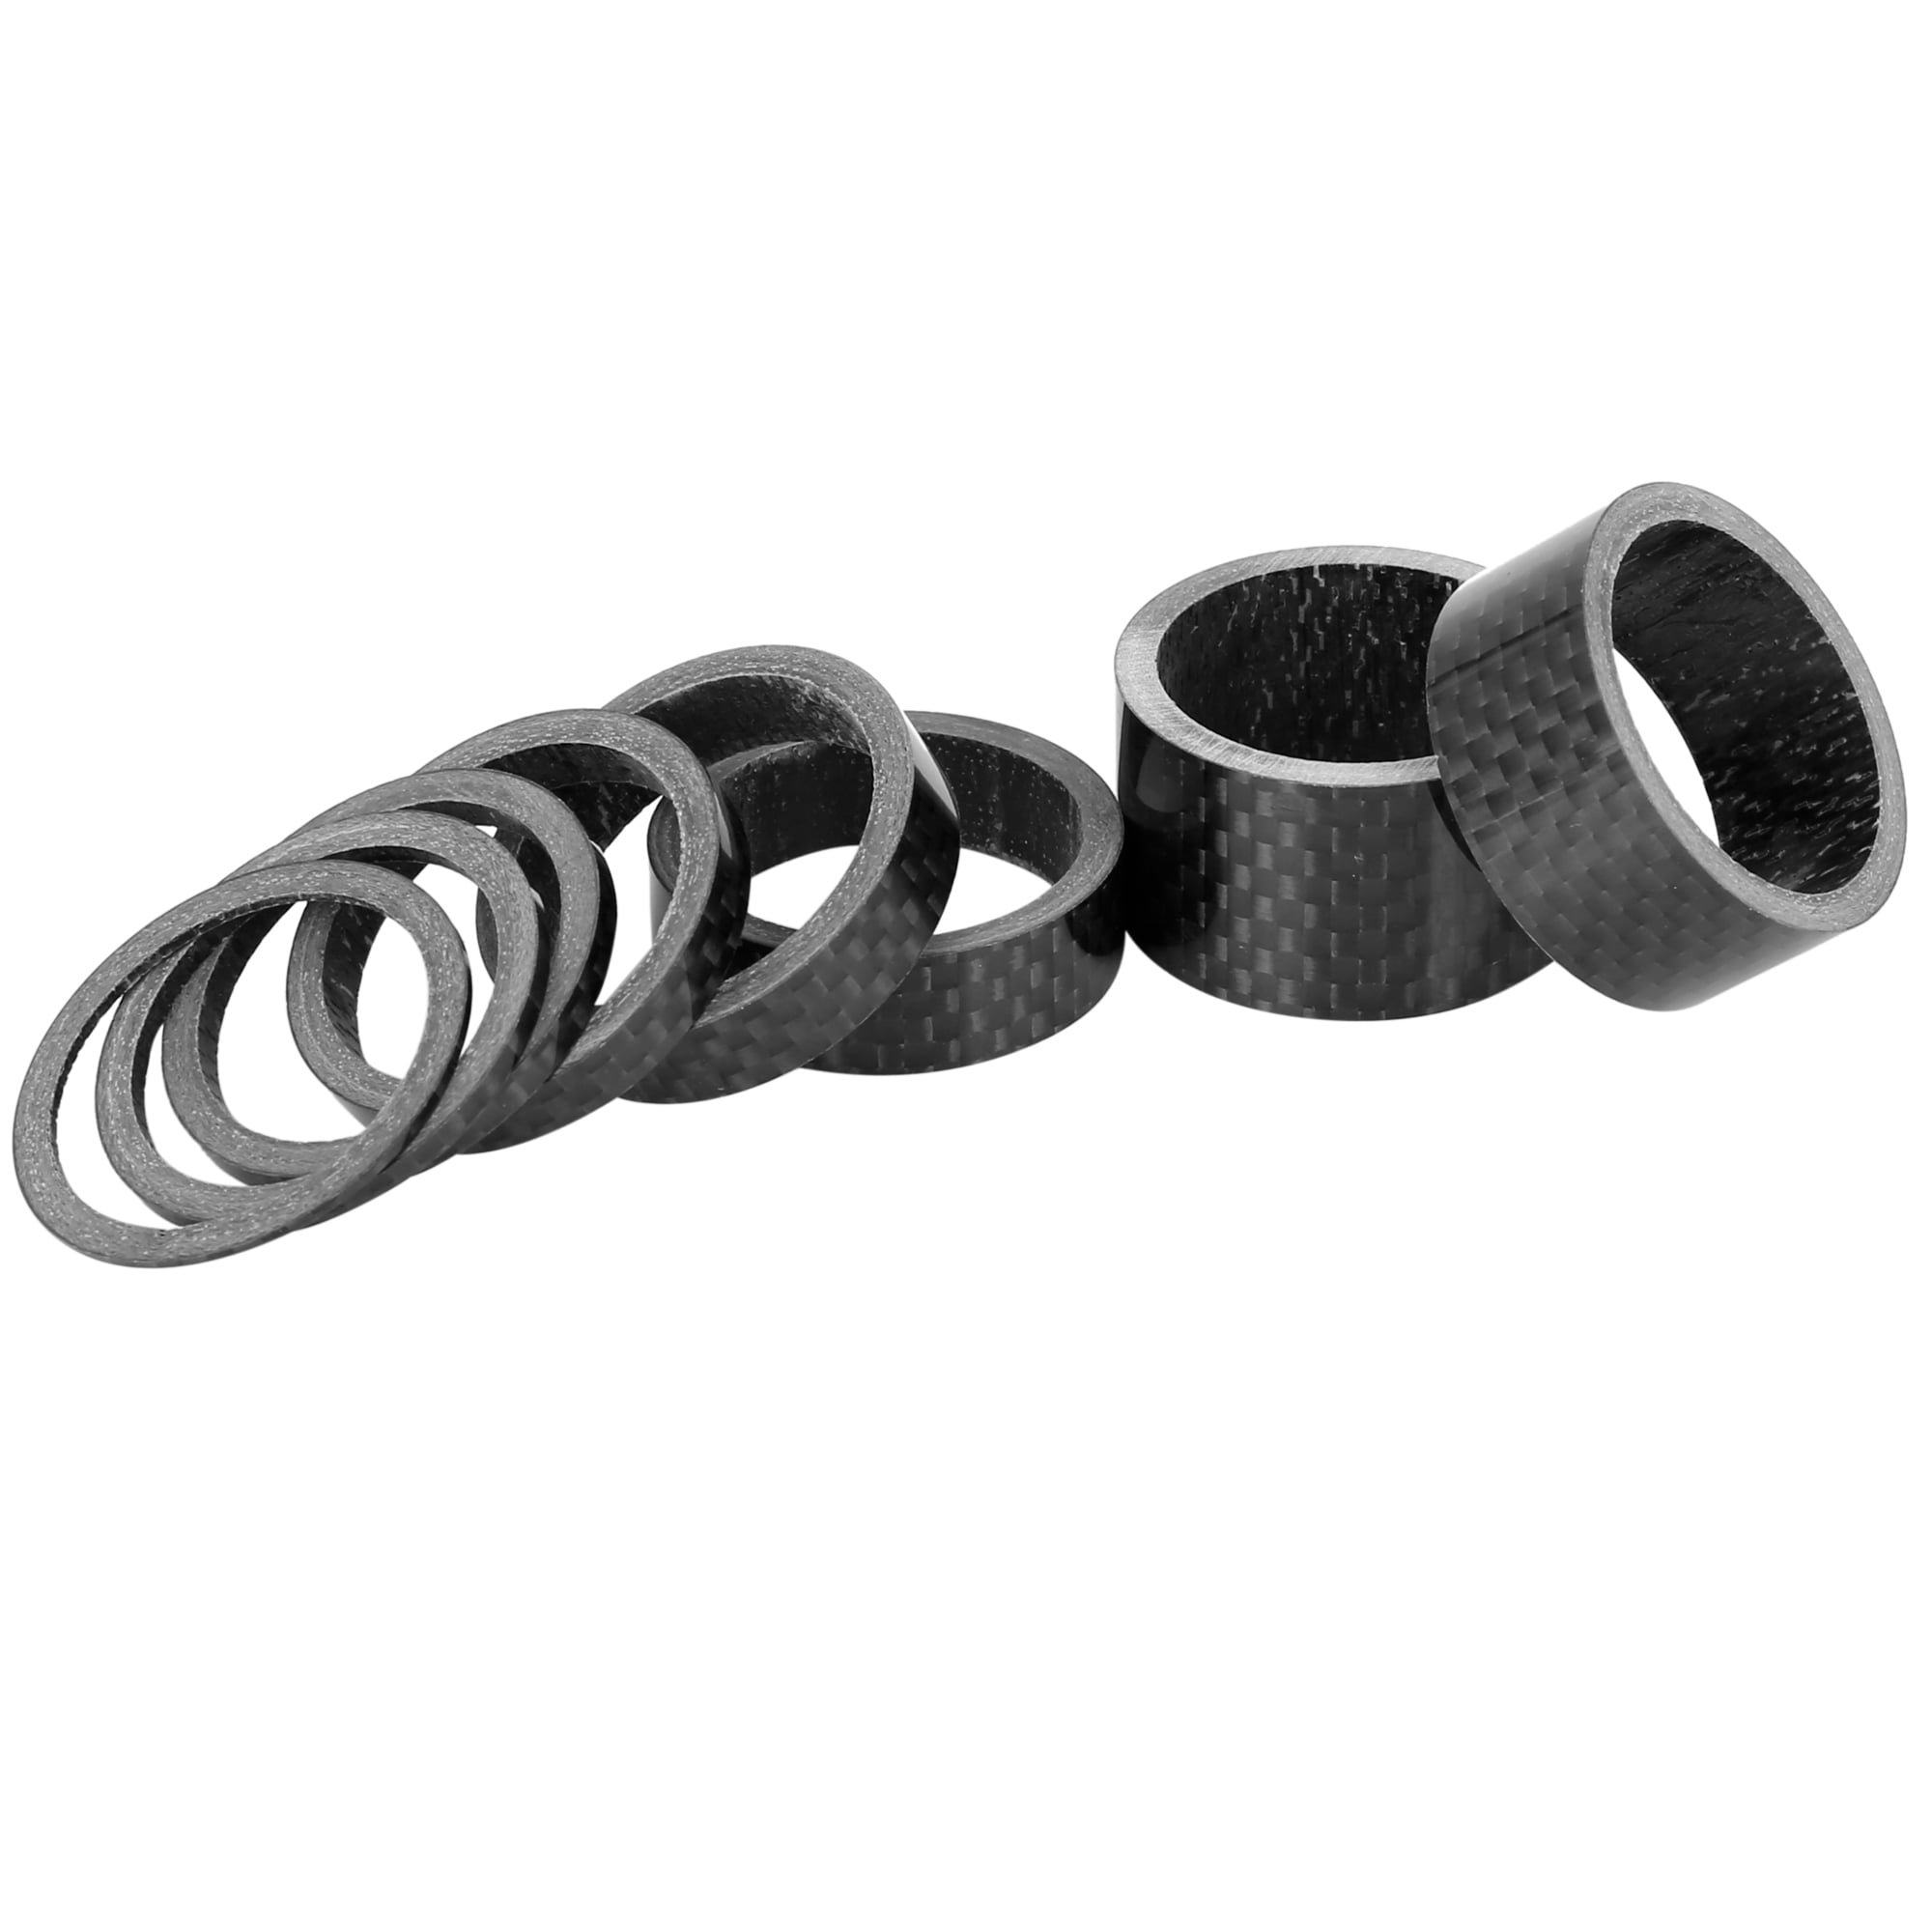 2 x 5 mm and 2 x 10 mm DTFO/0253951 Look Stem Spacers 1 1/8 Inch Carbon 